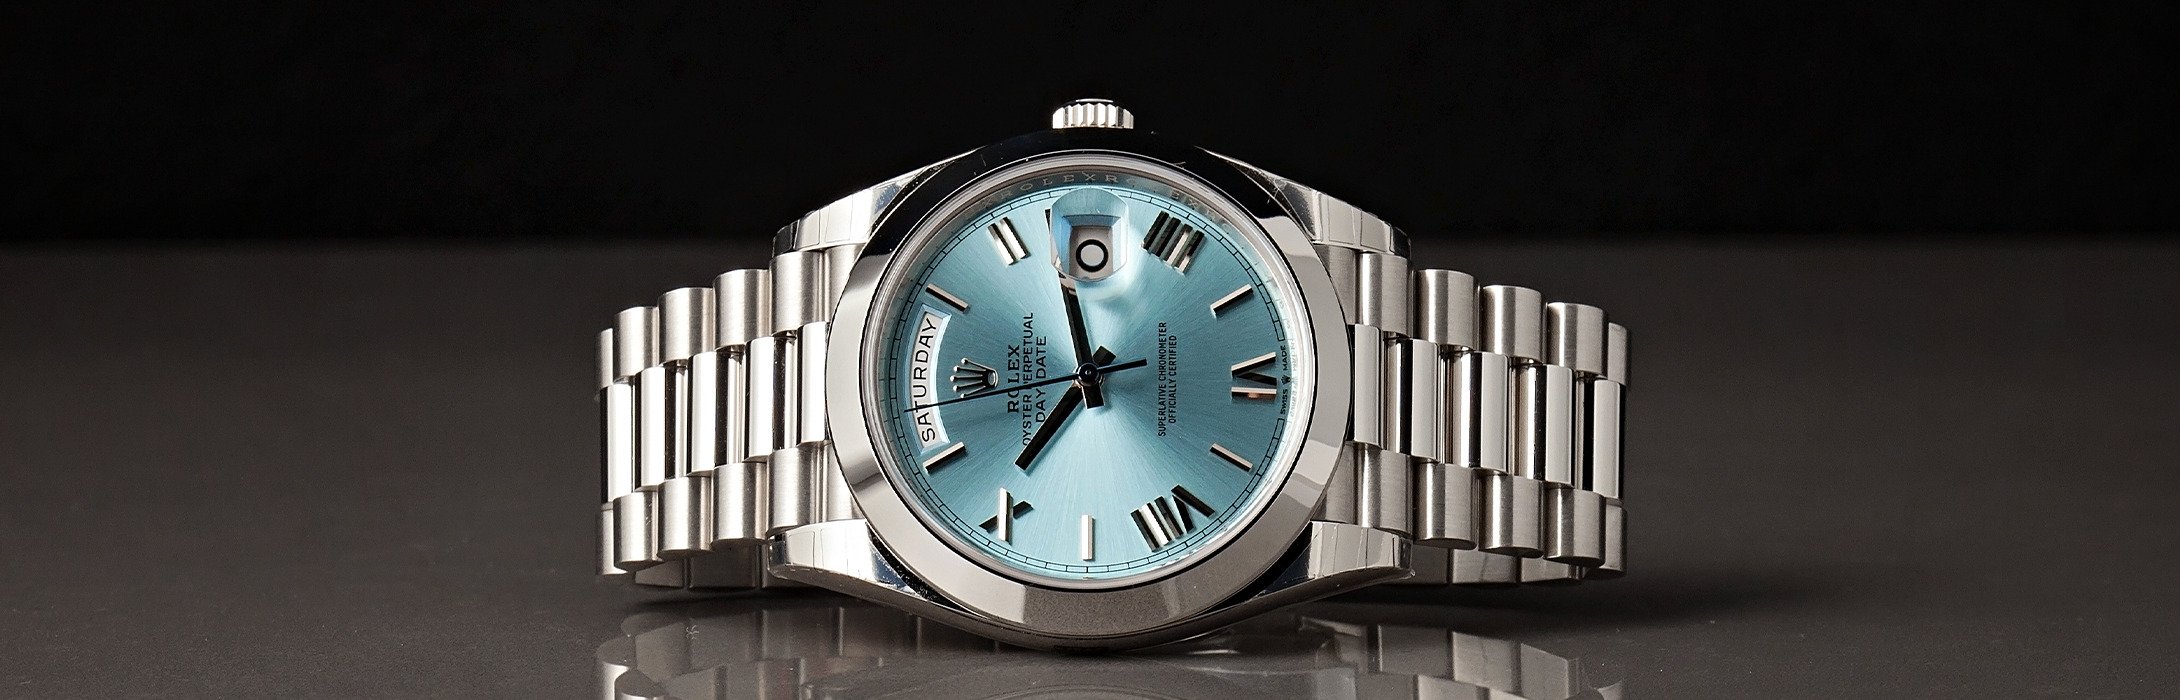 Rolex Platinum Day-Date Watch Ultimate Buying Guide